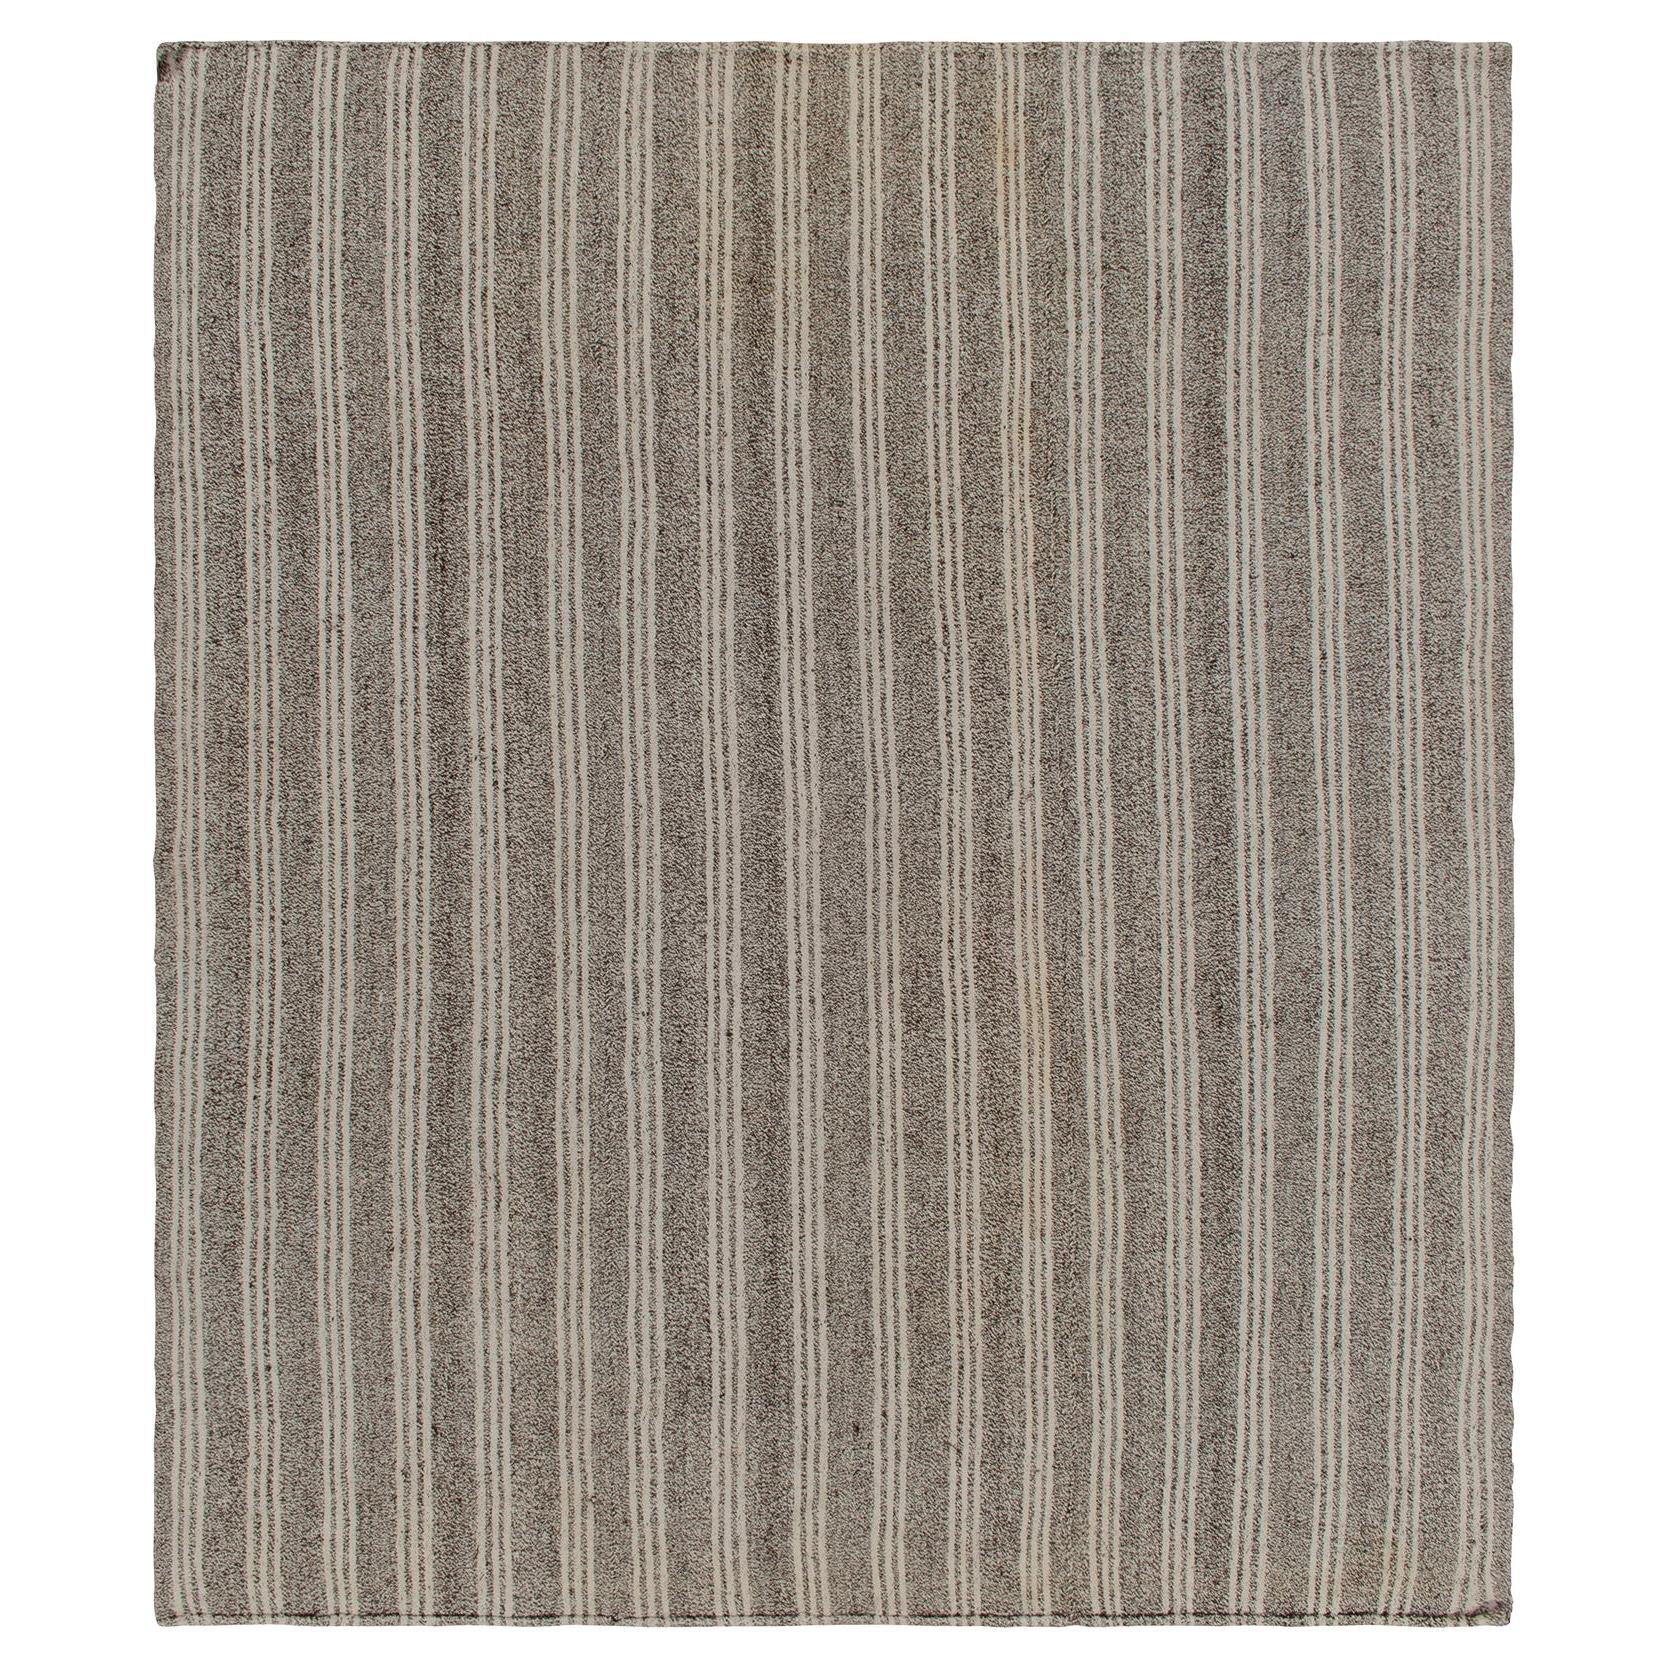 Vintage Striped Kilim in Gray Striations, Salt and Pepper Colors by Rug & Kilim